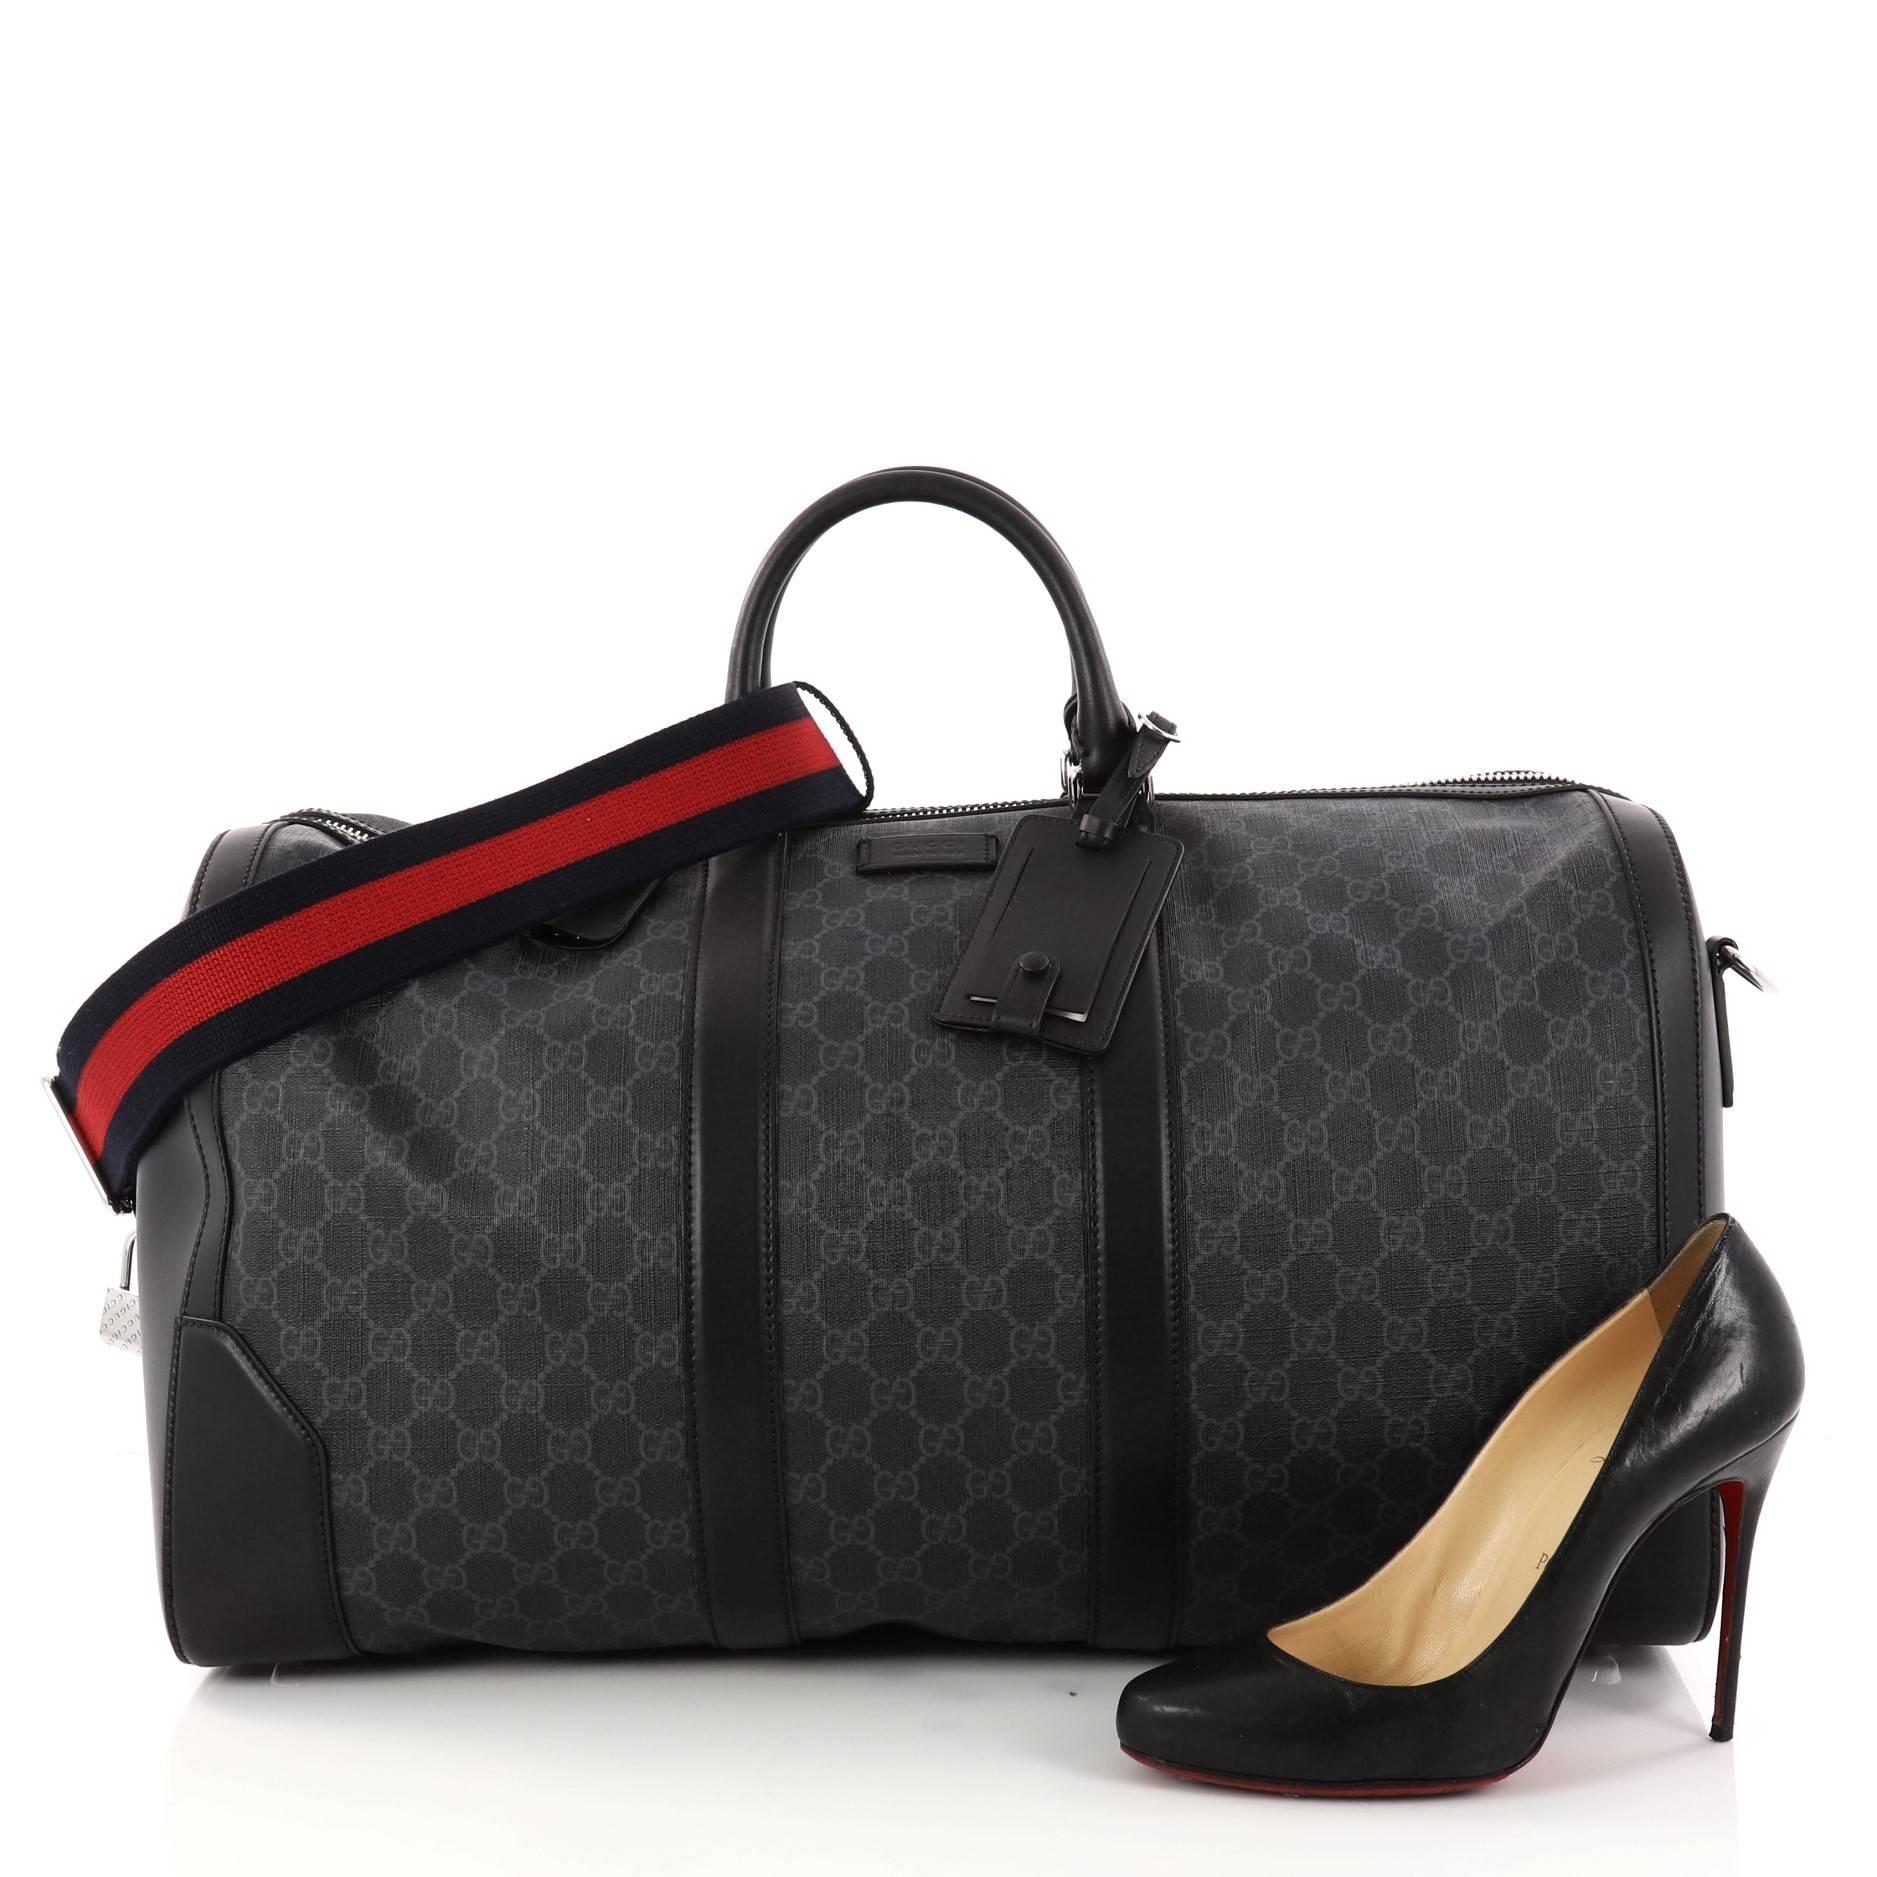 This authentic Gucci Convertible Duffle Bag GG Coated Canvas Large is a stylish bag made for weekend getaways and light travels. Crafted from charcoal GG supreme coated canvas, this duffle features dual-rolled leather handles, an adjustable shoulder